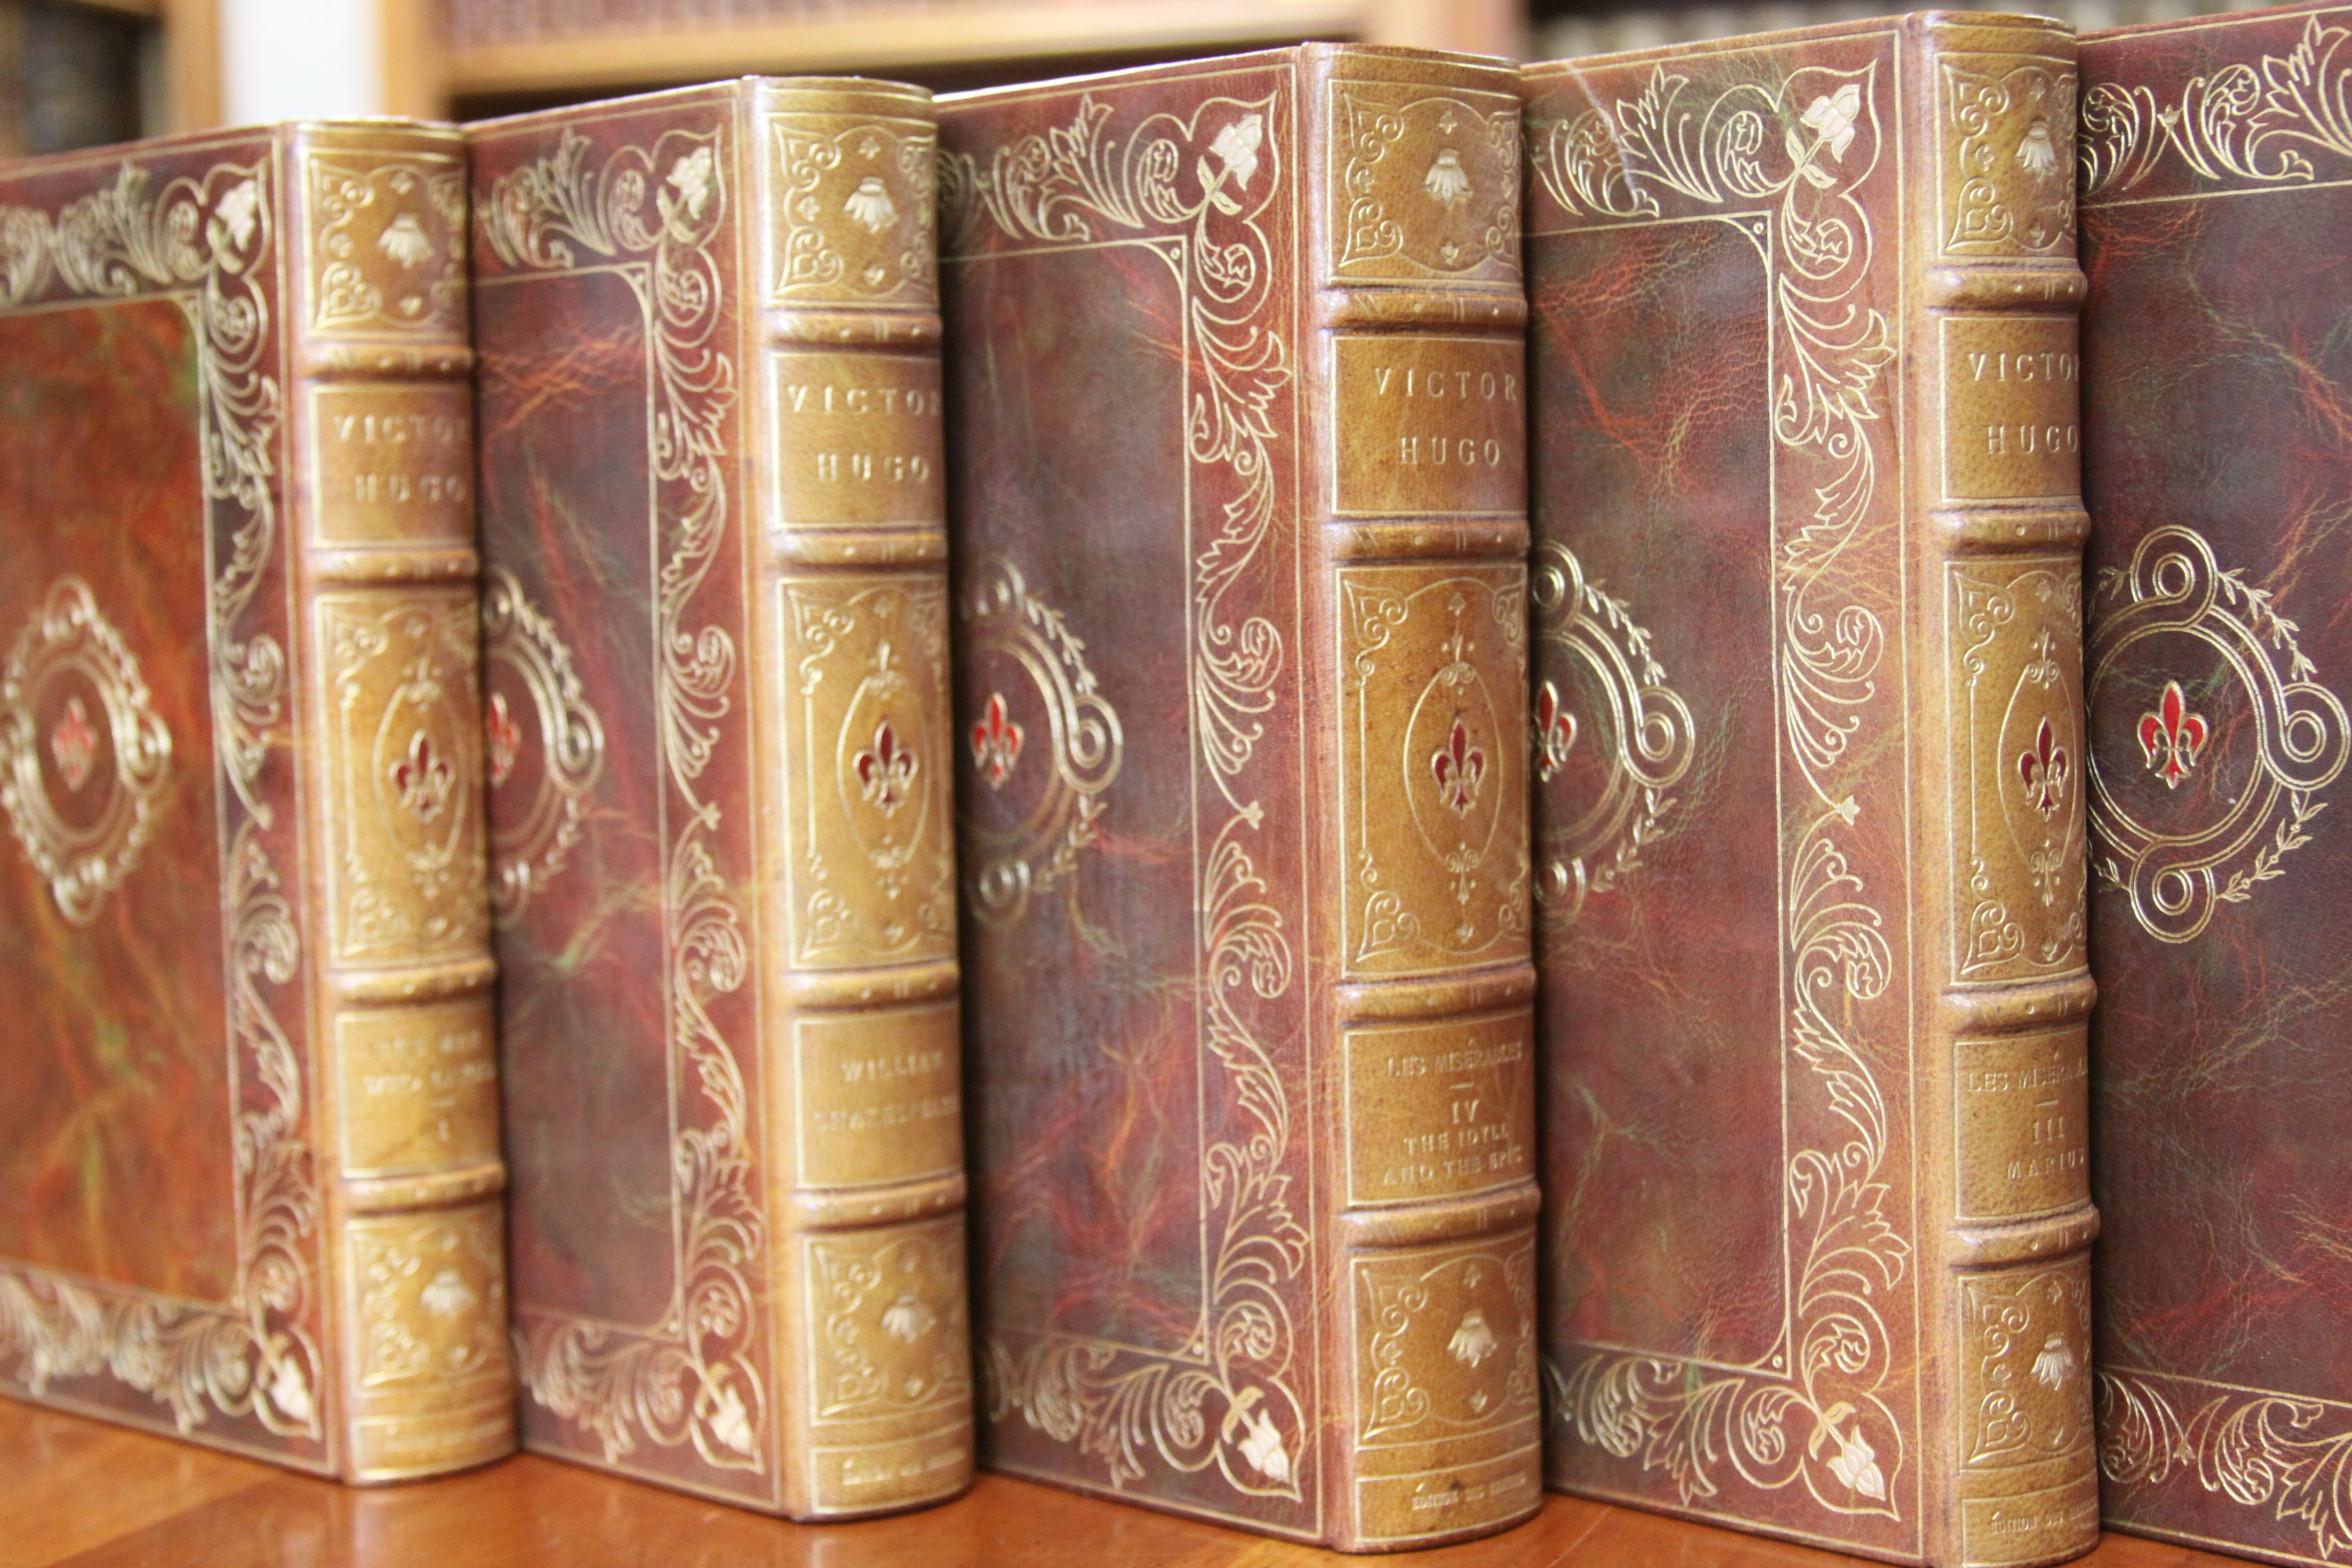 Books, Victor Hugo Writings, Antique Leather-Bound Collections 15